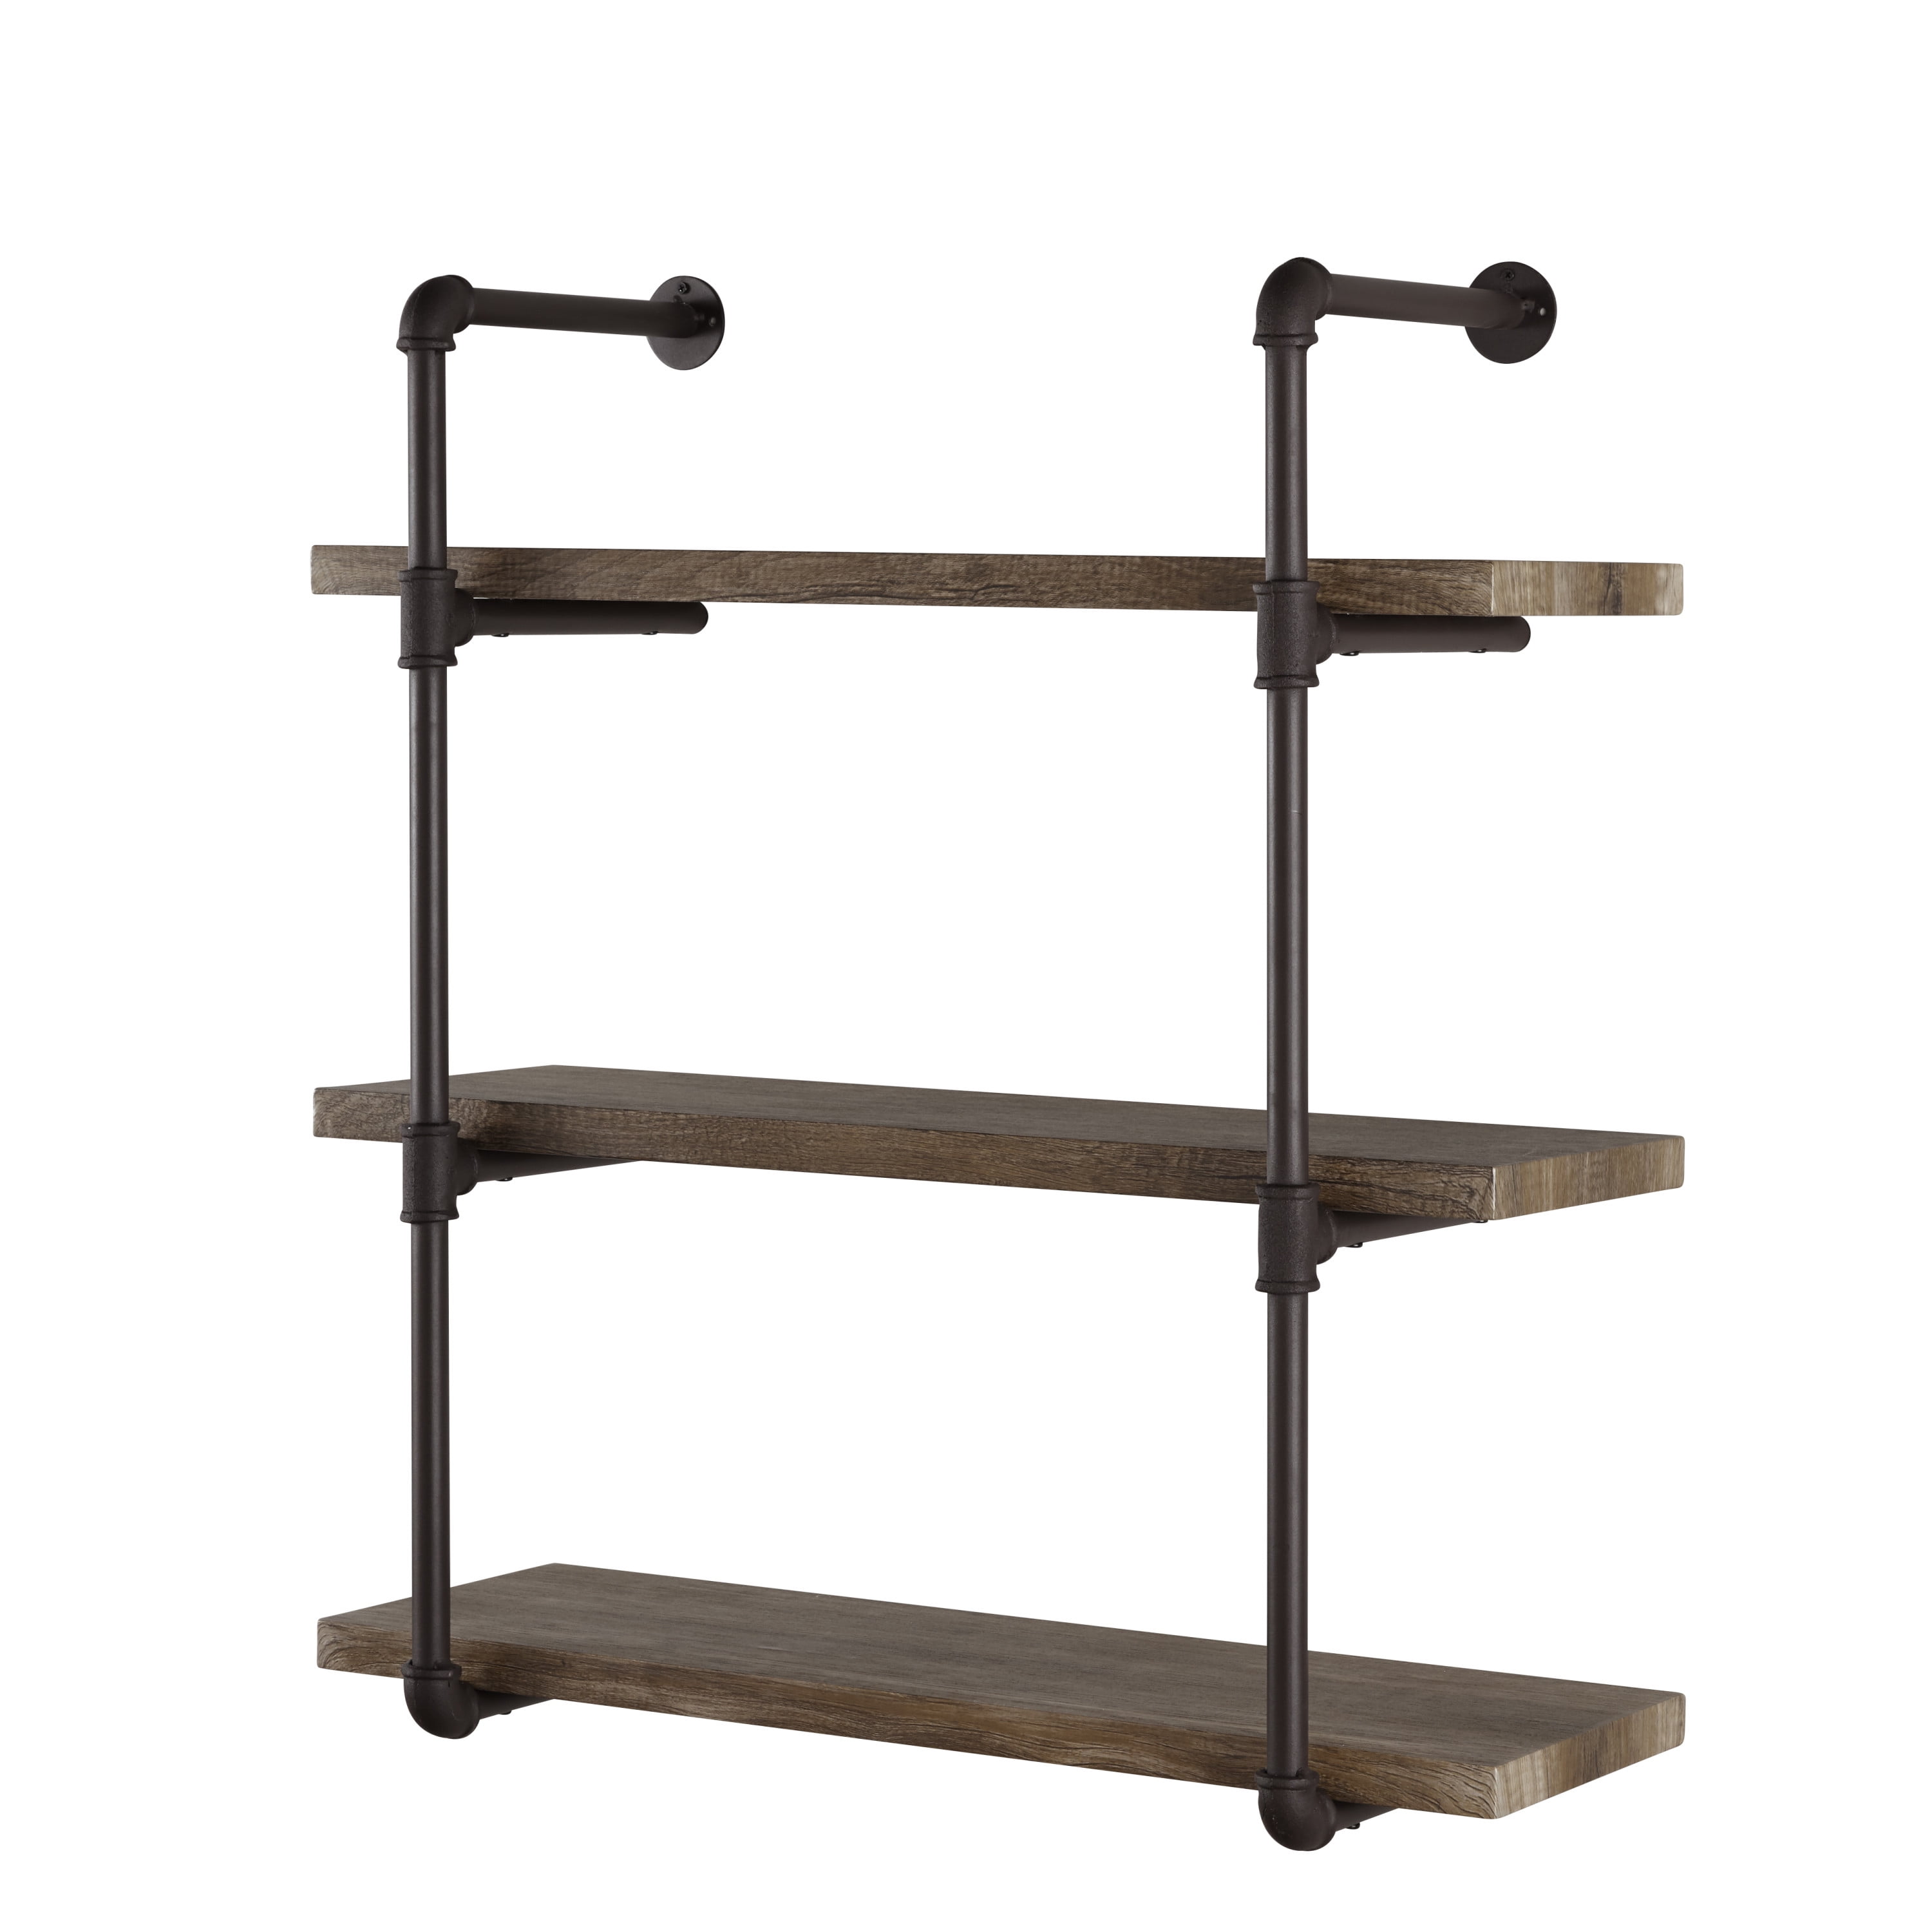 Danya B Three Tier Industrial Pipe, Shelves Made Out Of Plumbing Pipes